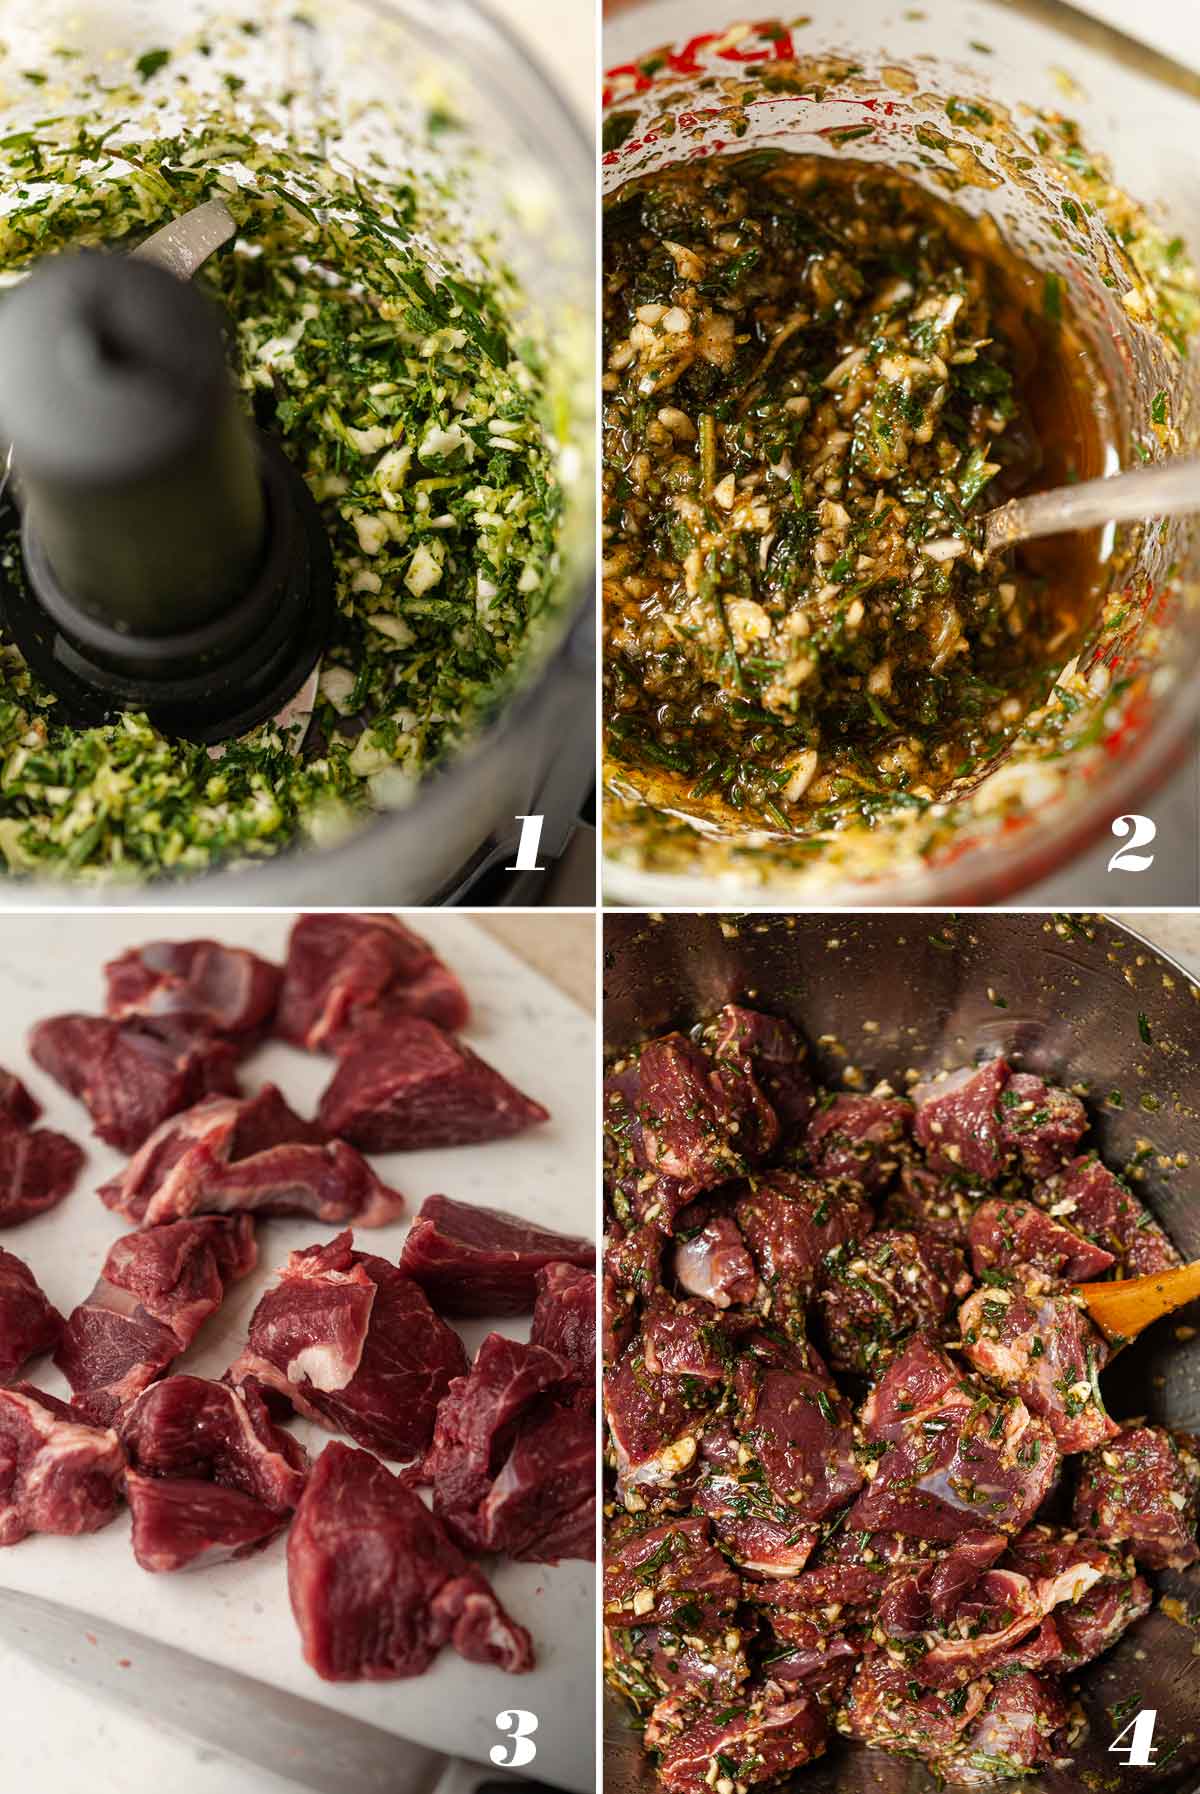 A collage of 4 numbered images showing how to prep ingredients for lamb skewers.